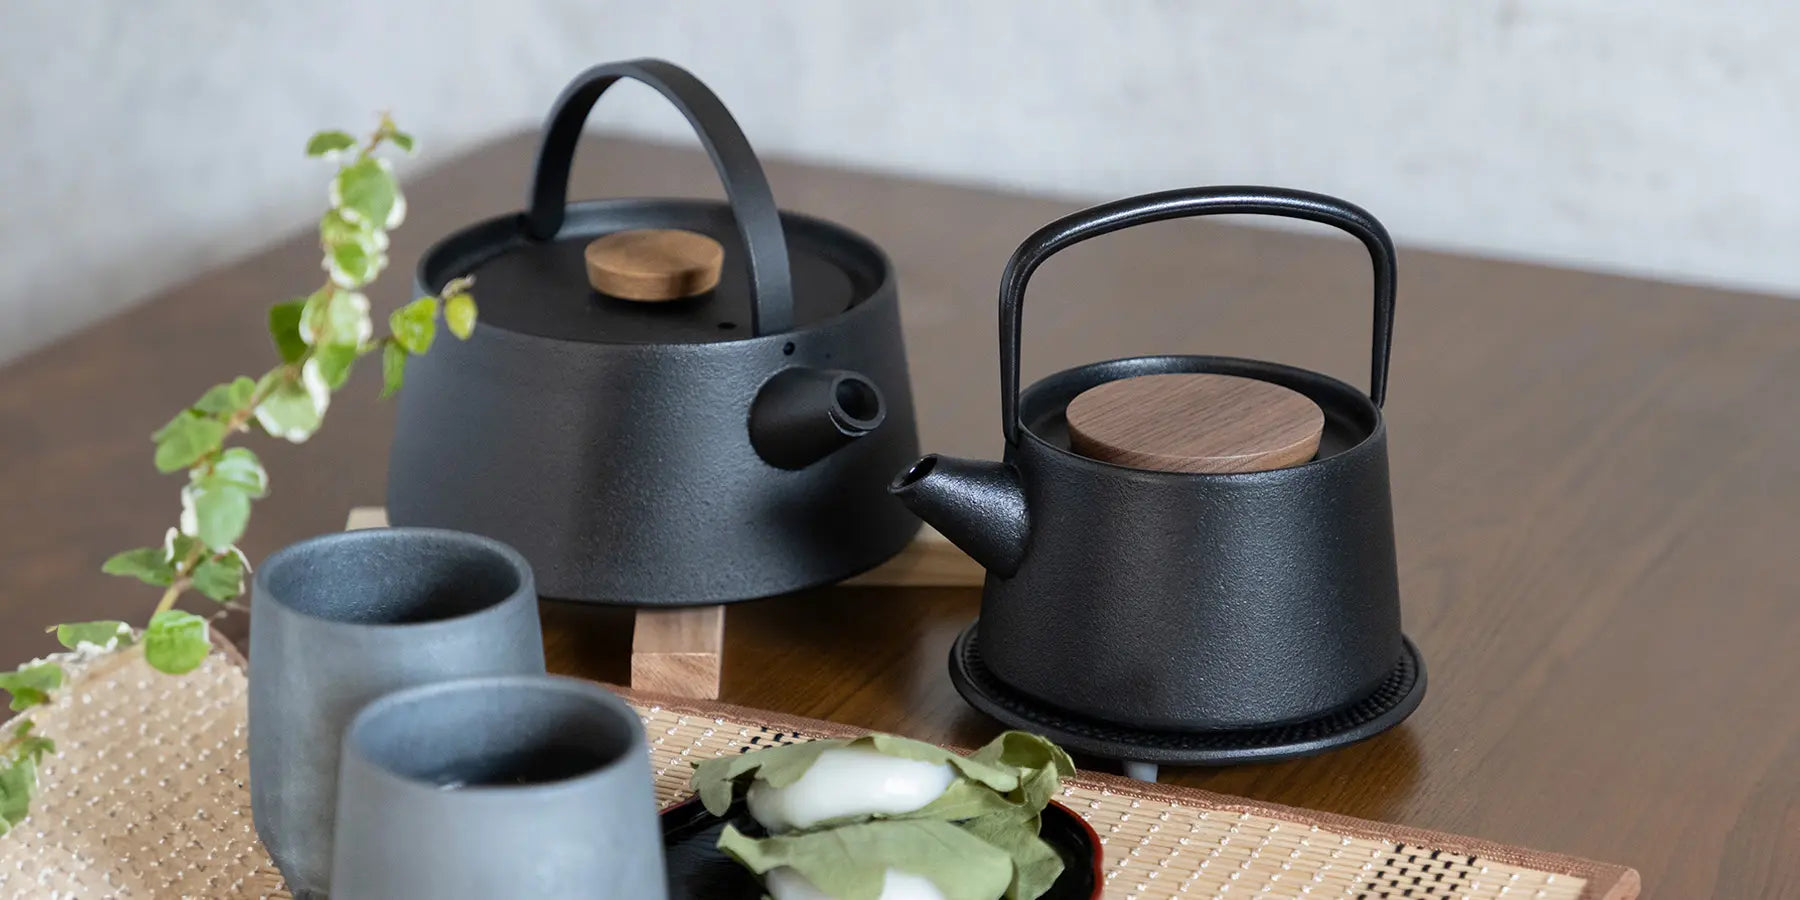 Discover our great selection of Tetsubin & Tetsukyusu at Globalkitchen Japan.